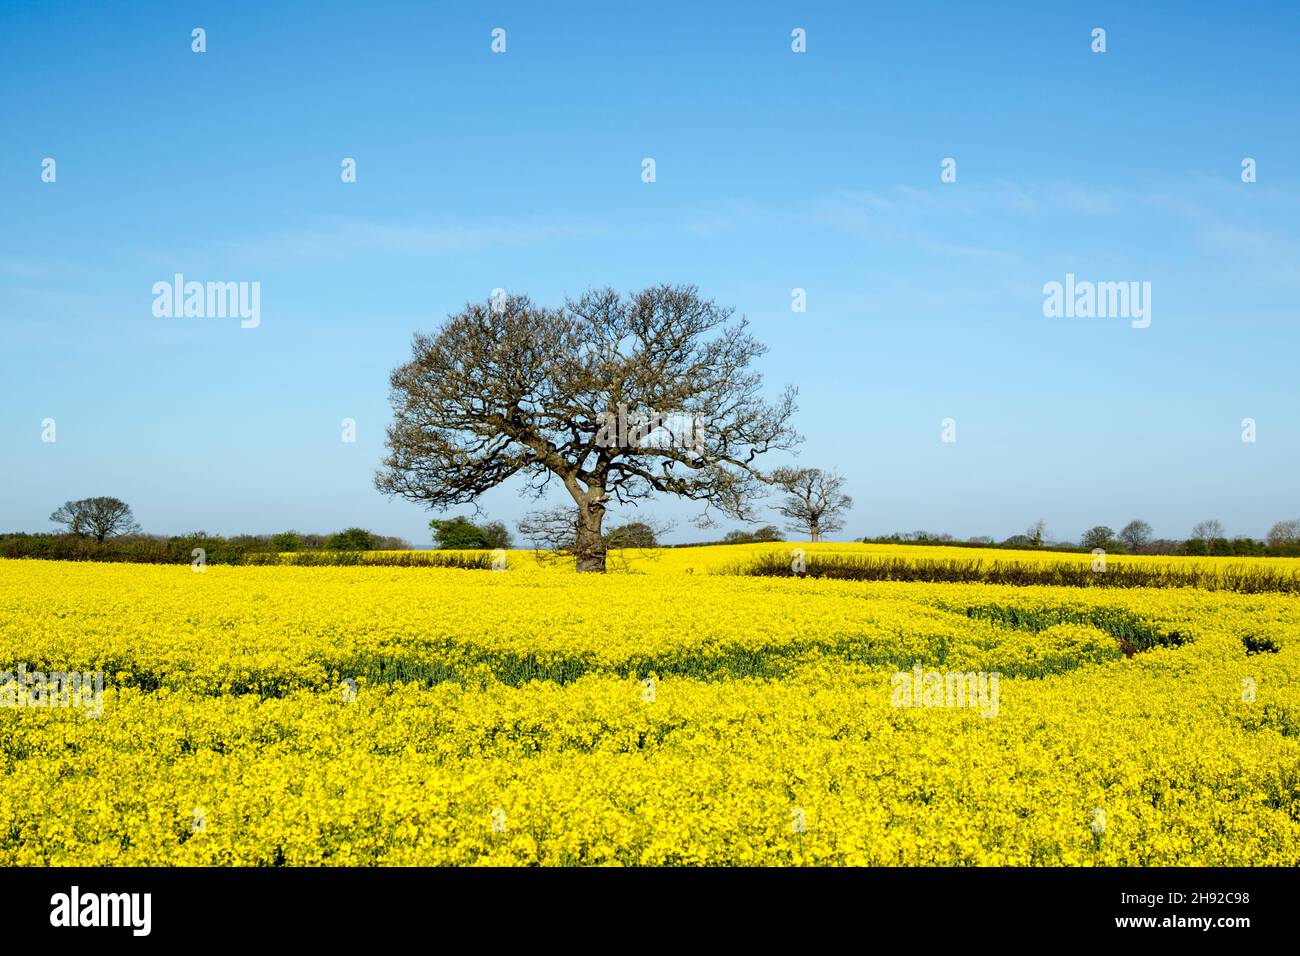 Spring season flowering rapeseed, Brassica napus, crop under blue sky showing fields, hedges and trees, also known as rape and oilseed rape Stock Photo